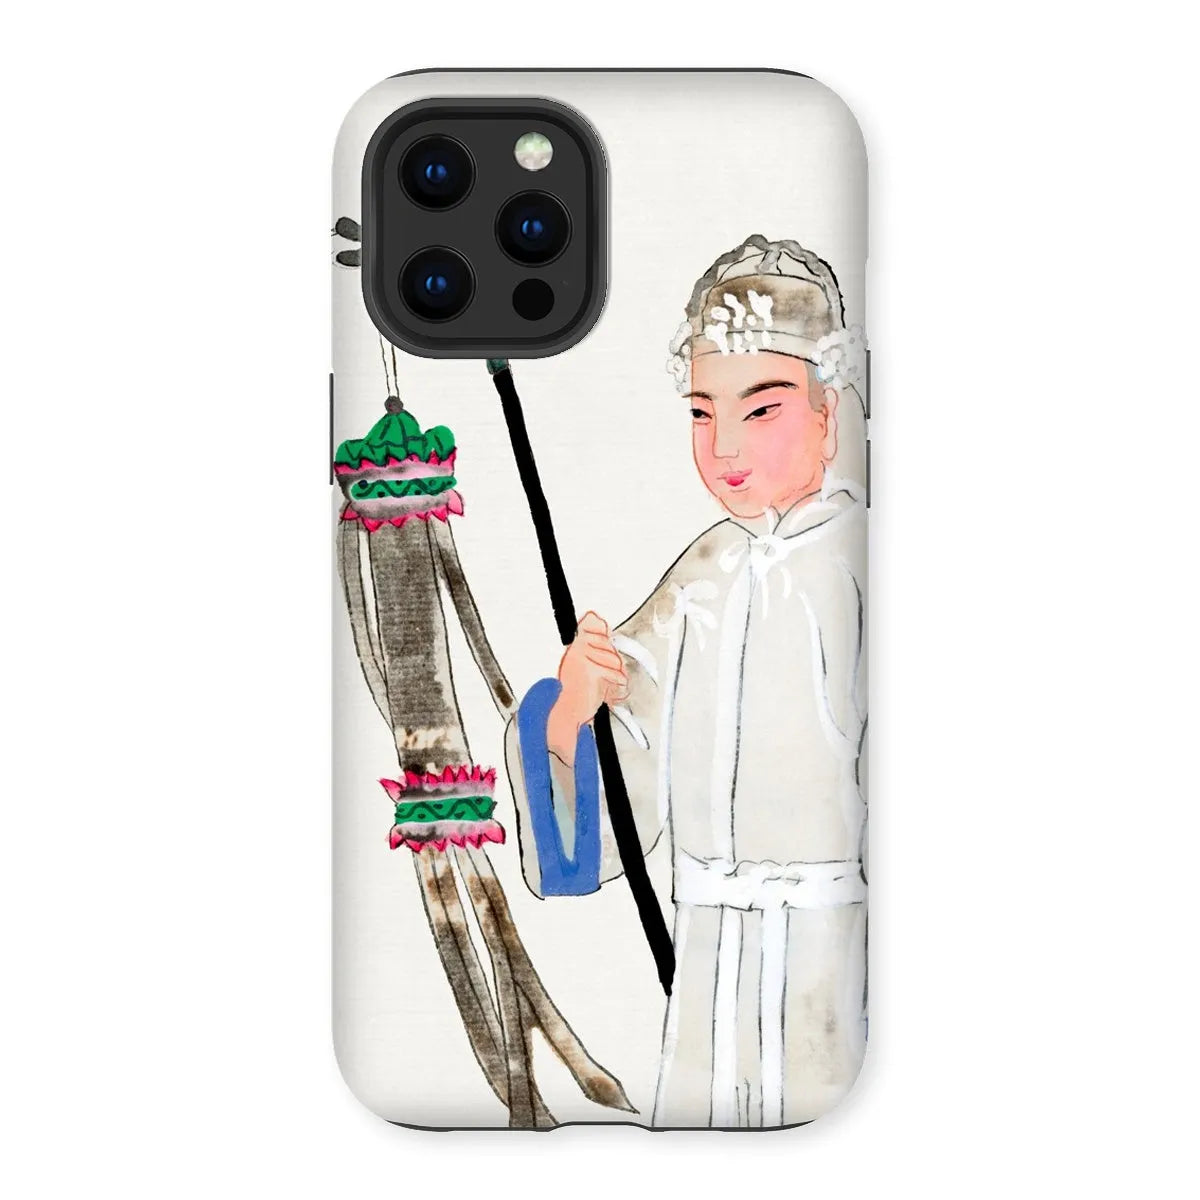 Man In Mourning - Chinese Historical Art Phone Case - Iphone 12 Pro Max / Matte - Mobile Phone Cases - Aesthetic Art